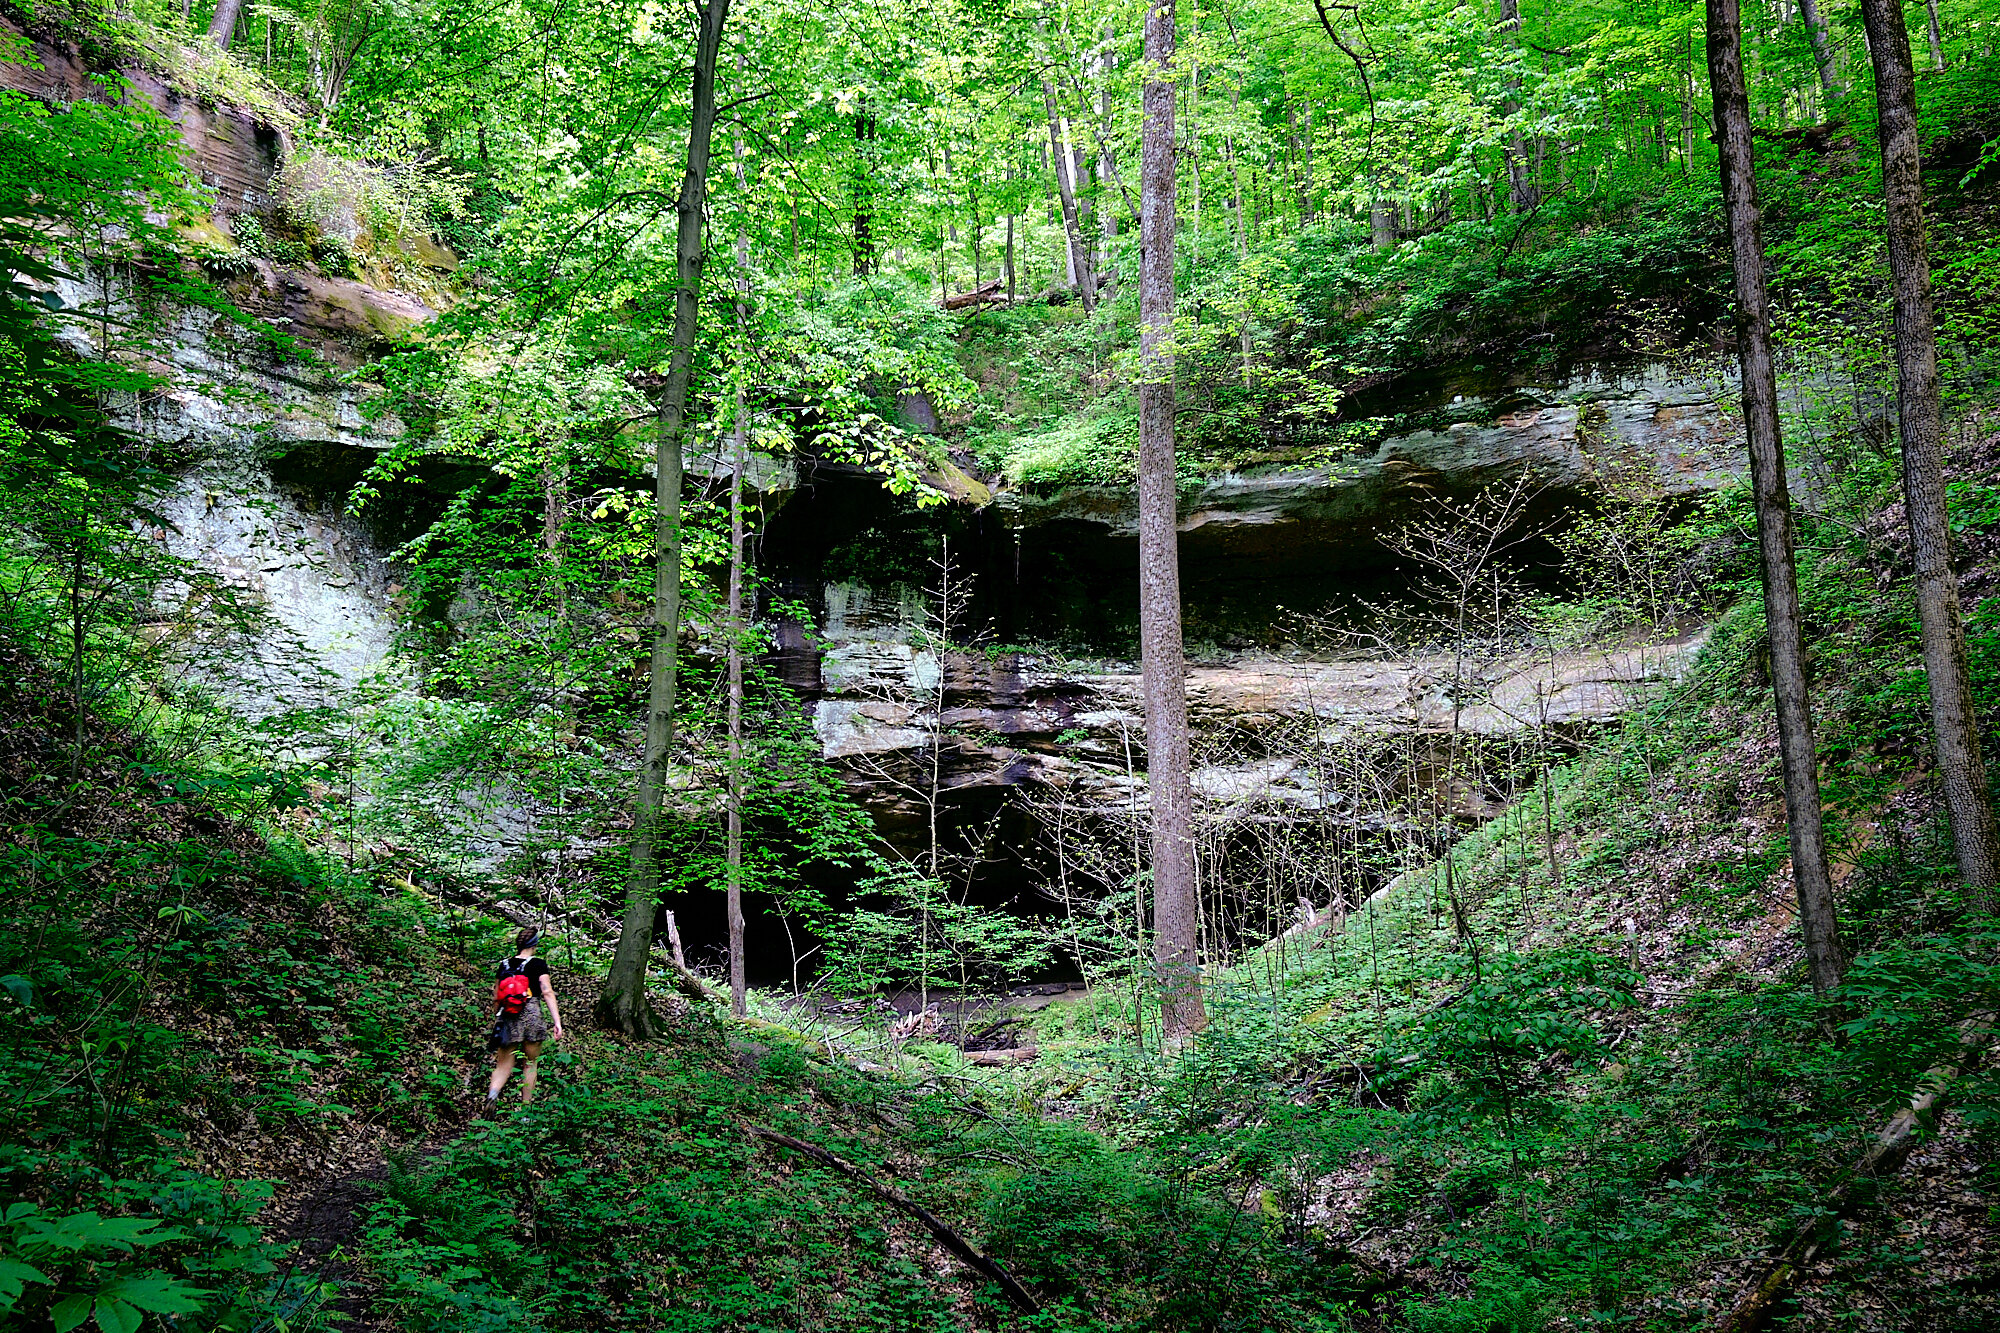  Turtlehead Cave, one of thousands of rockhouses in the sandstone hills of the Ohio River Valley. | 5/17/20 Athens, OH 